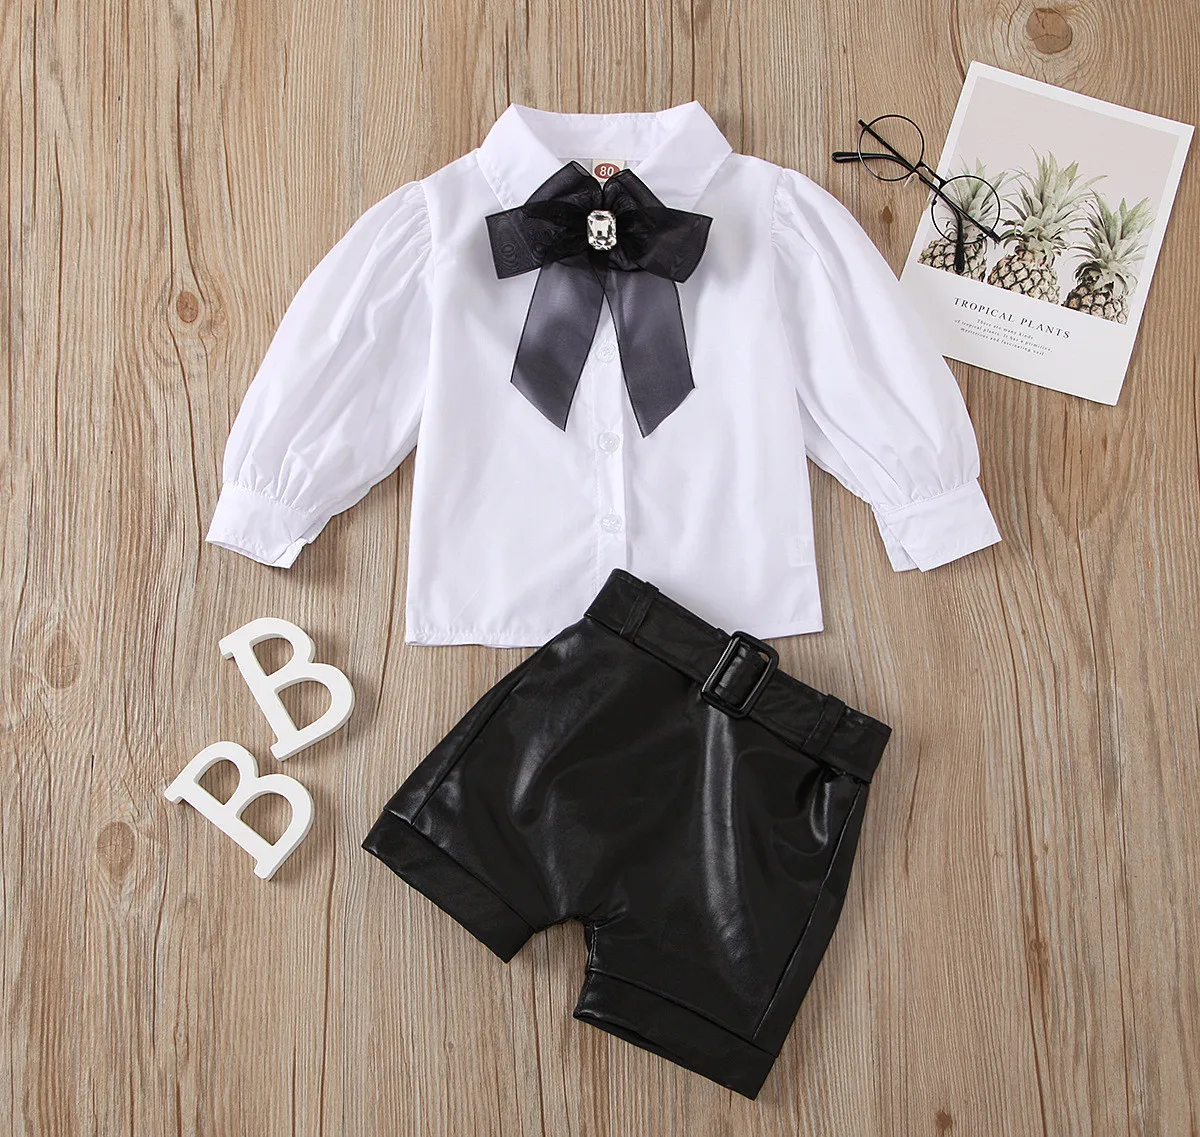 

1-5Y fashion Baby Girls Clothes Set Bubble Long Sleeve Button Collar White Shirt + PU Leather Shorts Girls 2pcs casual Clothes, As image shown